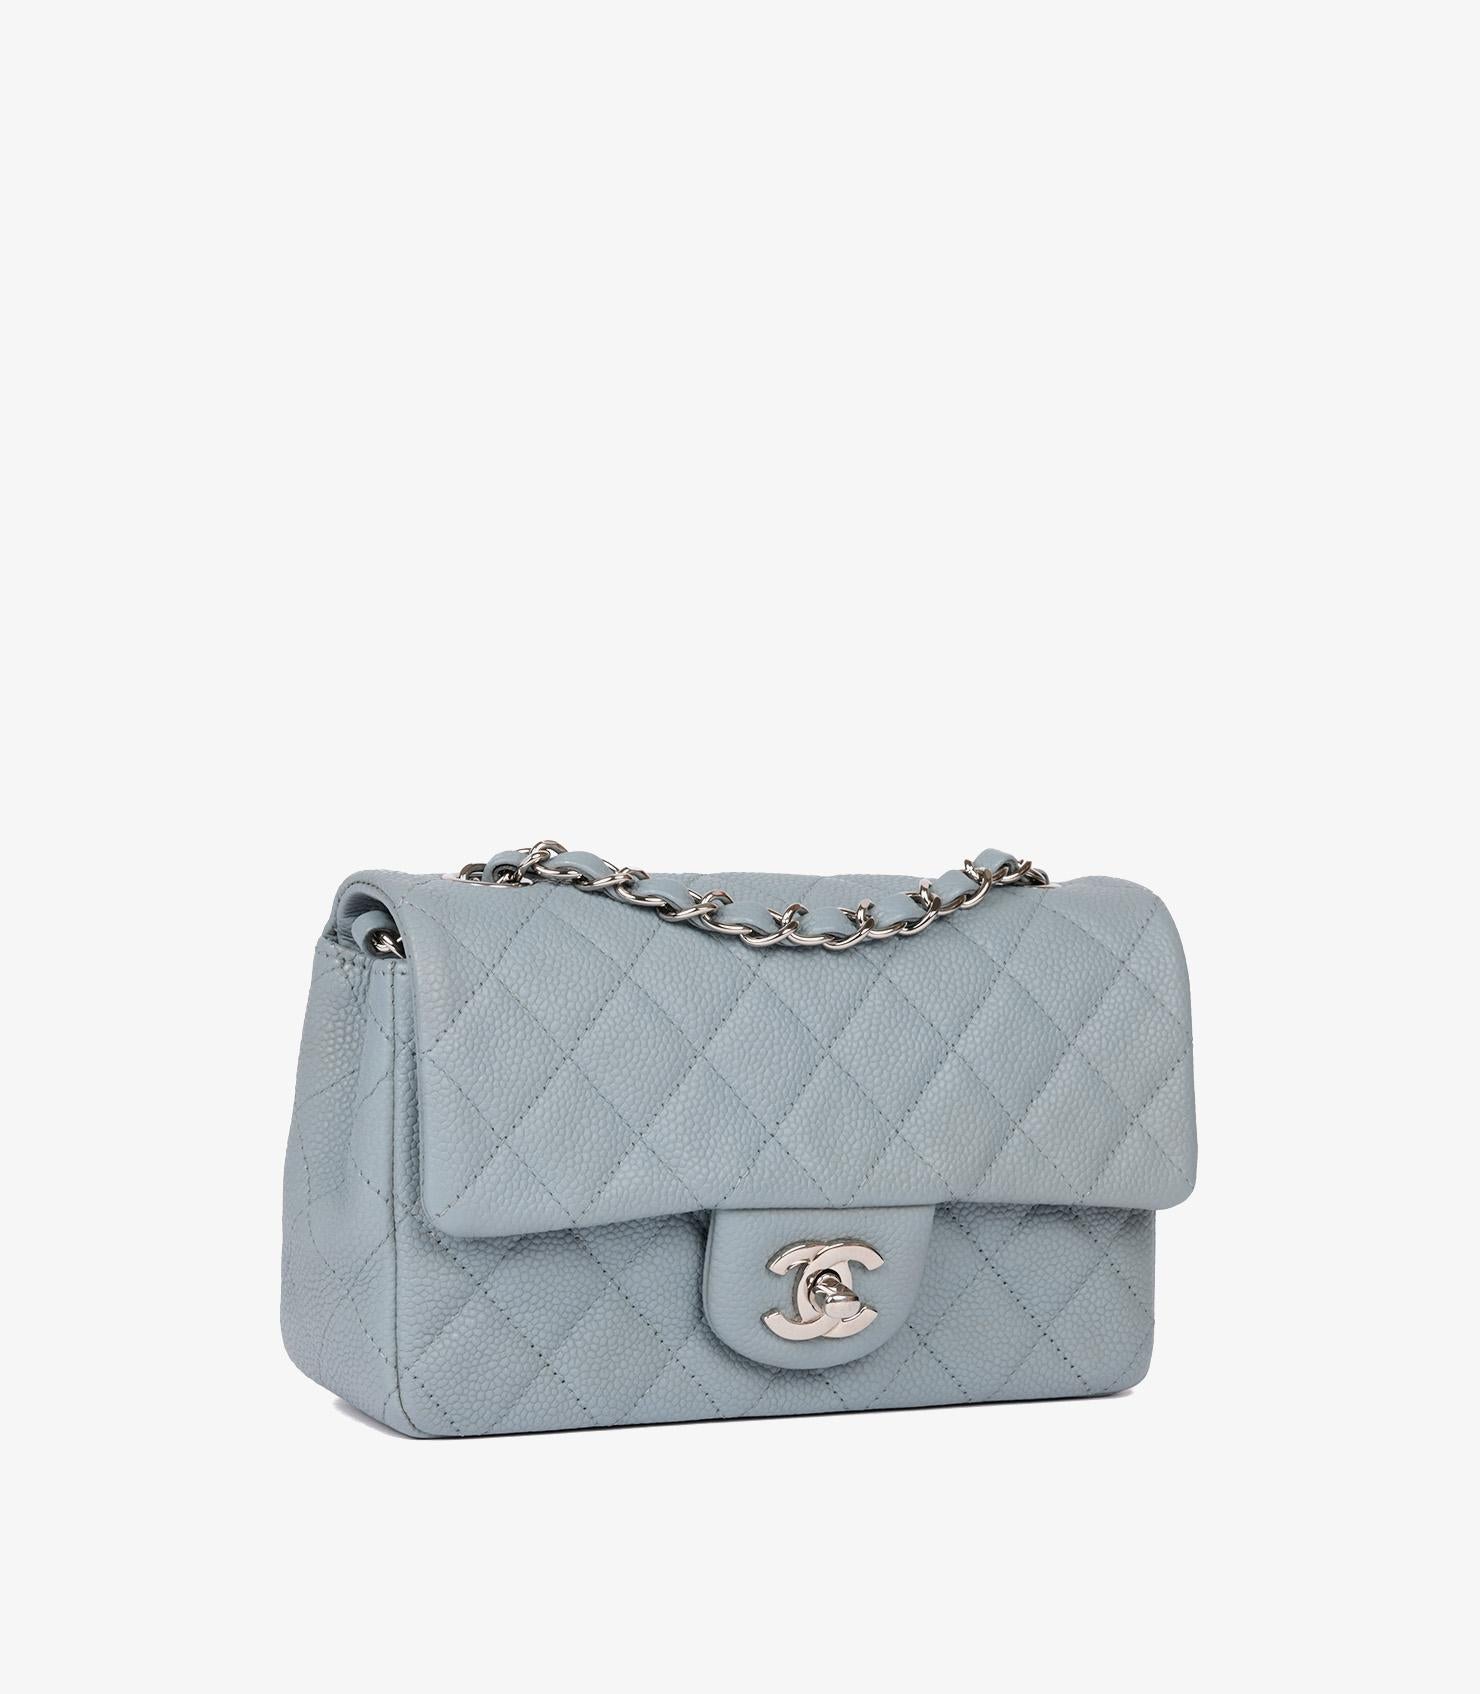 Gray Chanel Grey Quilted Caviar Leather Rectangular Mini Flap Bag